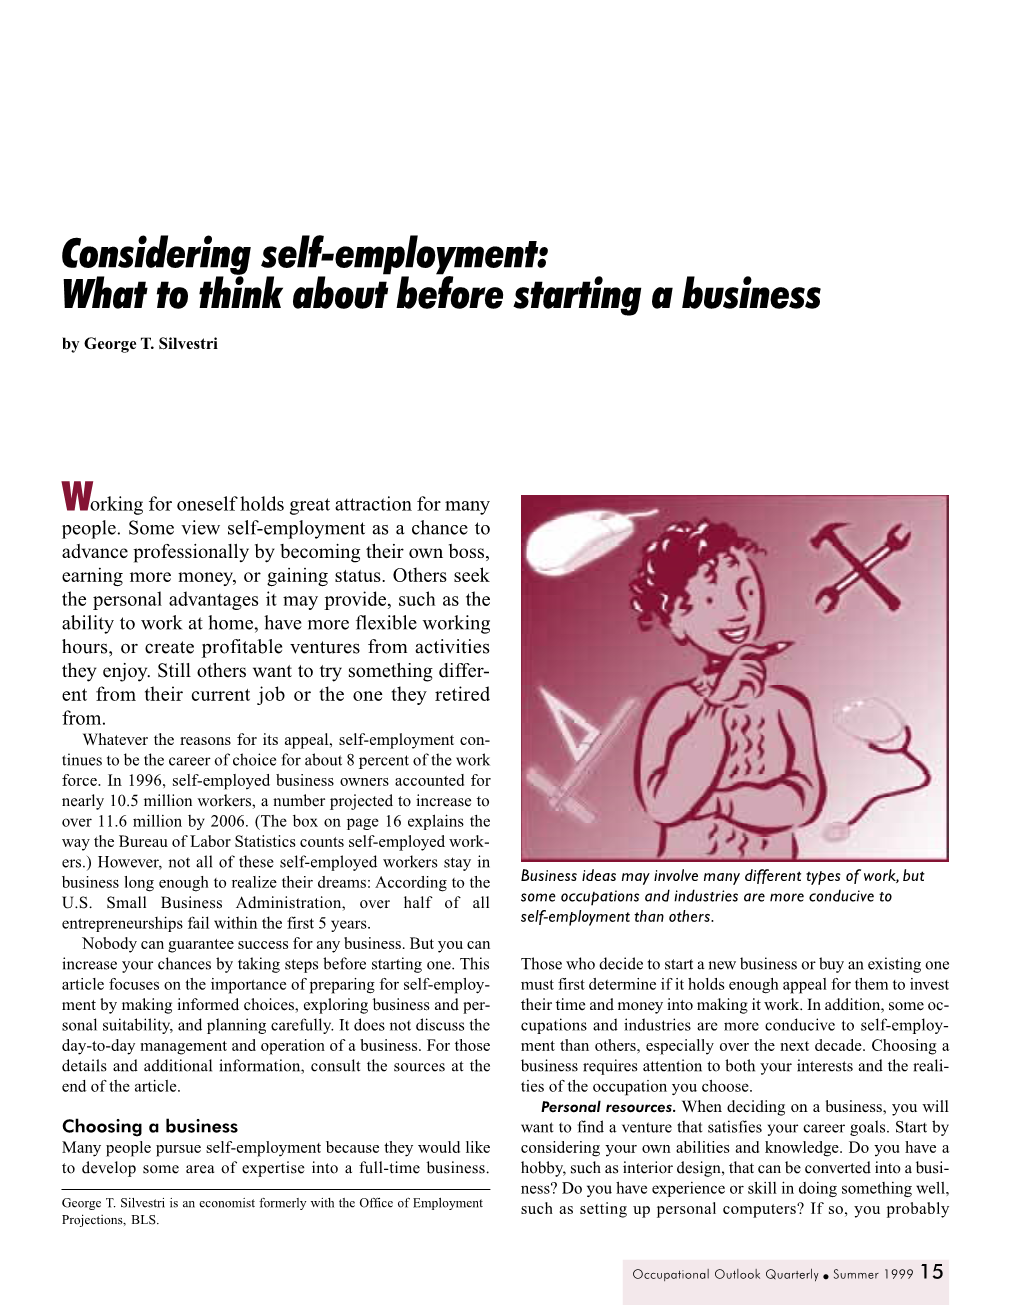 Considering Self-Employment: What to Think About Before Starting a Business by George T